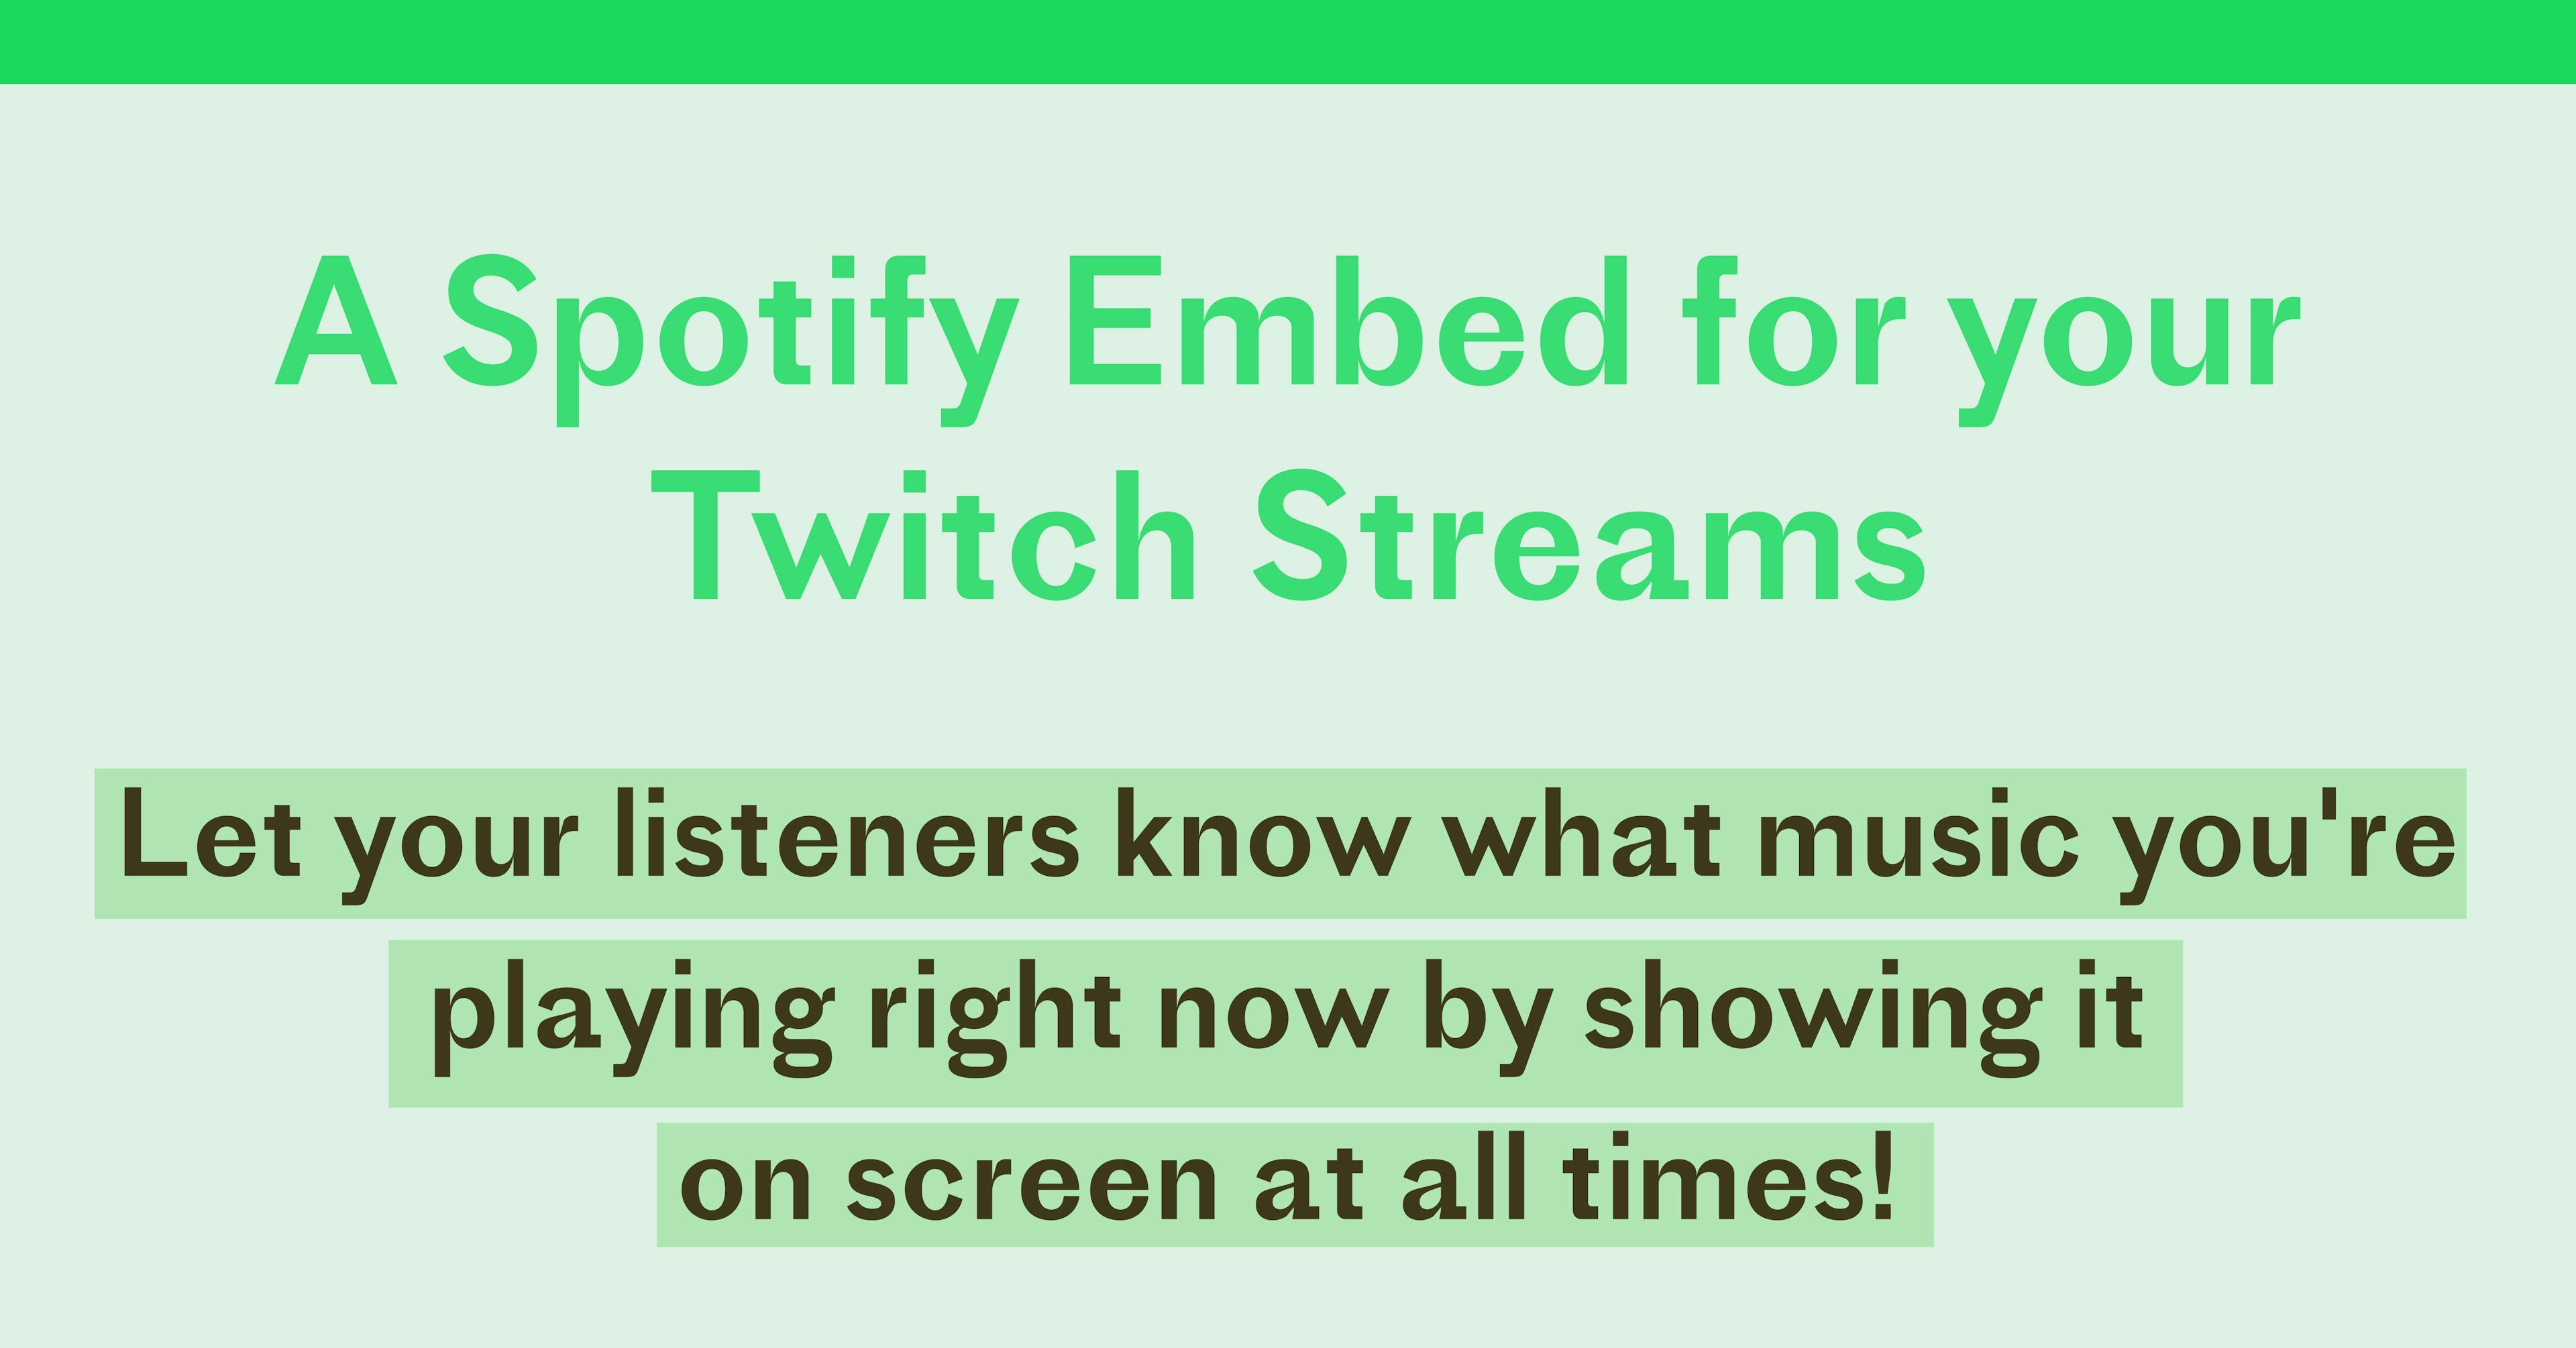 A Spotify Embed for your Twitch Streams